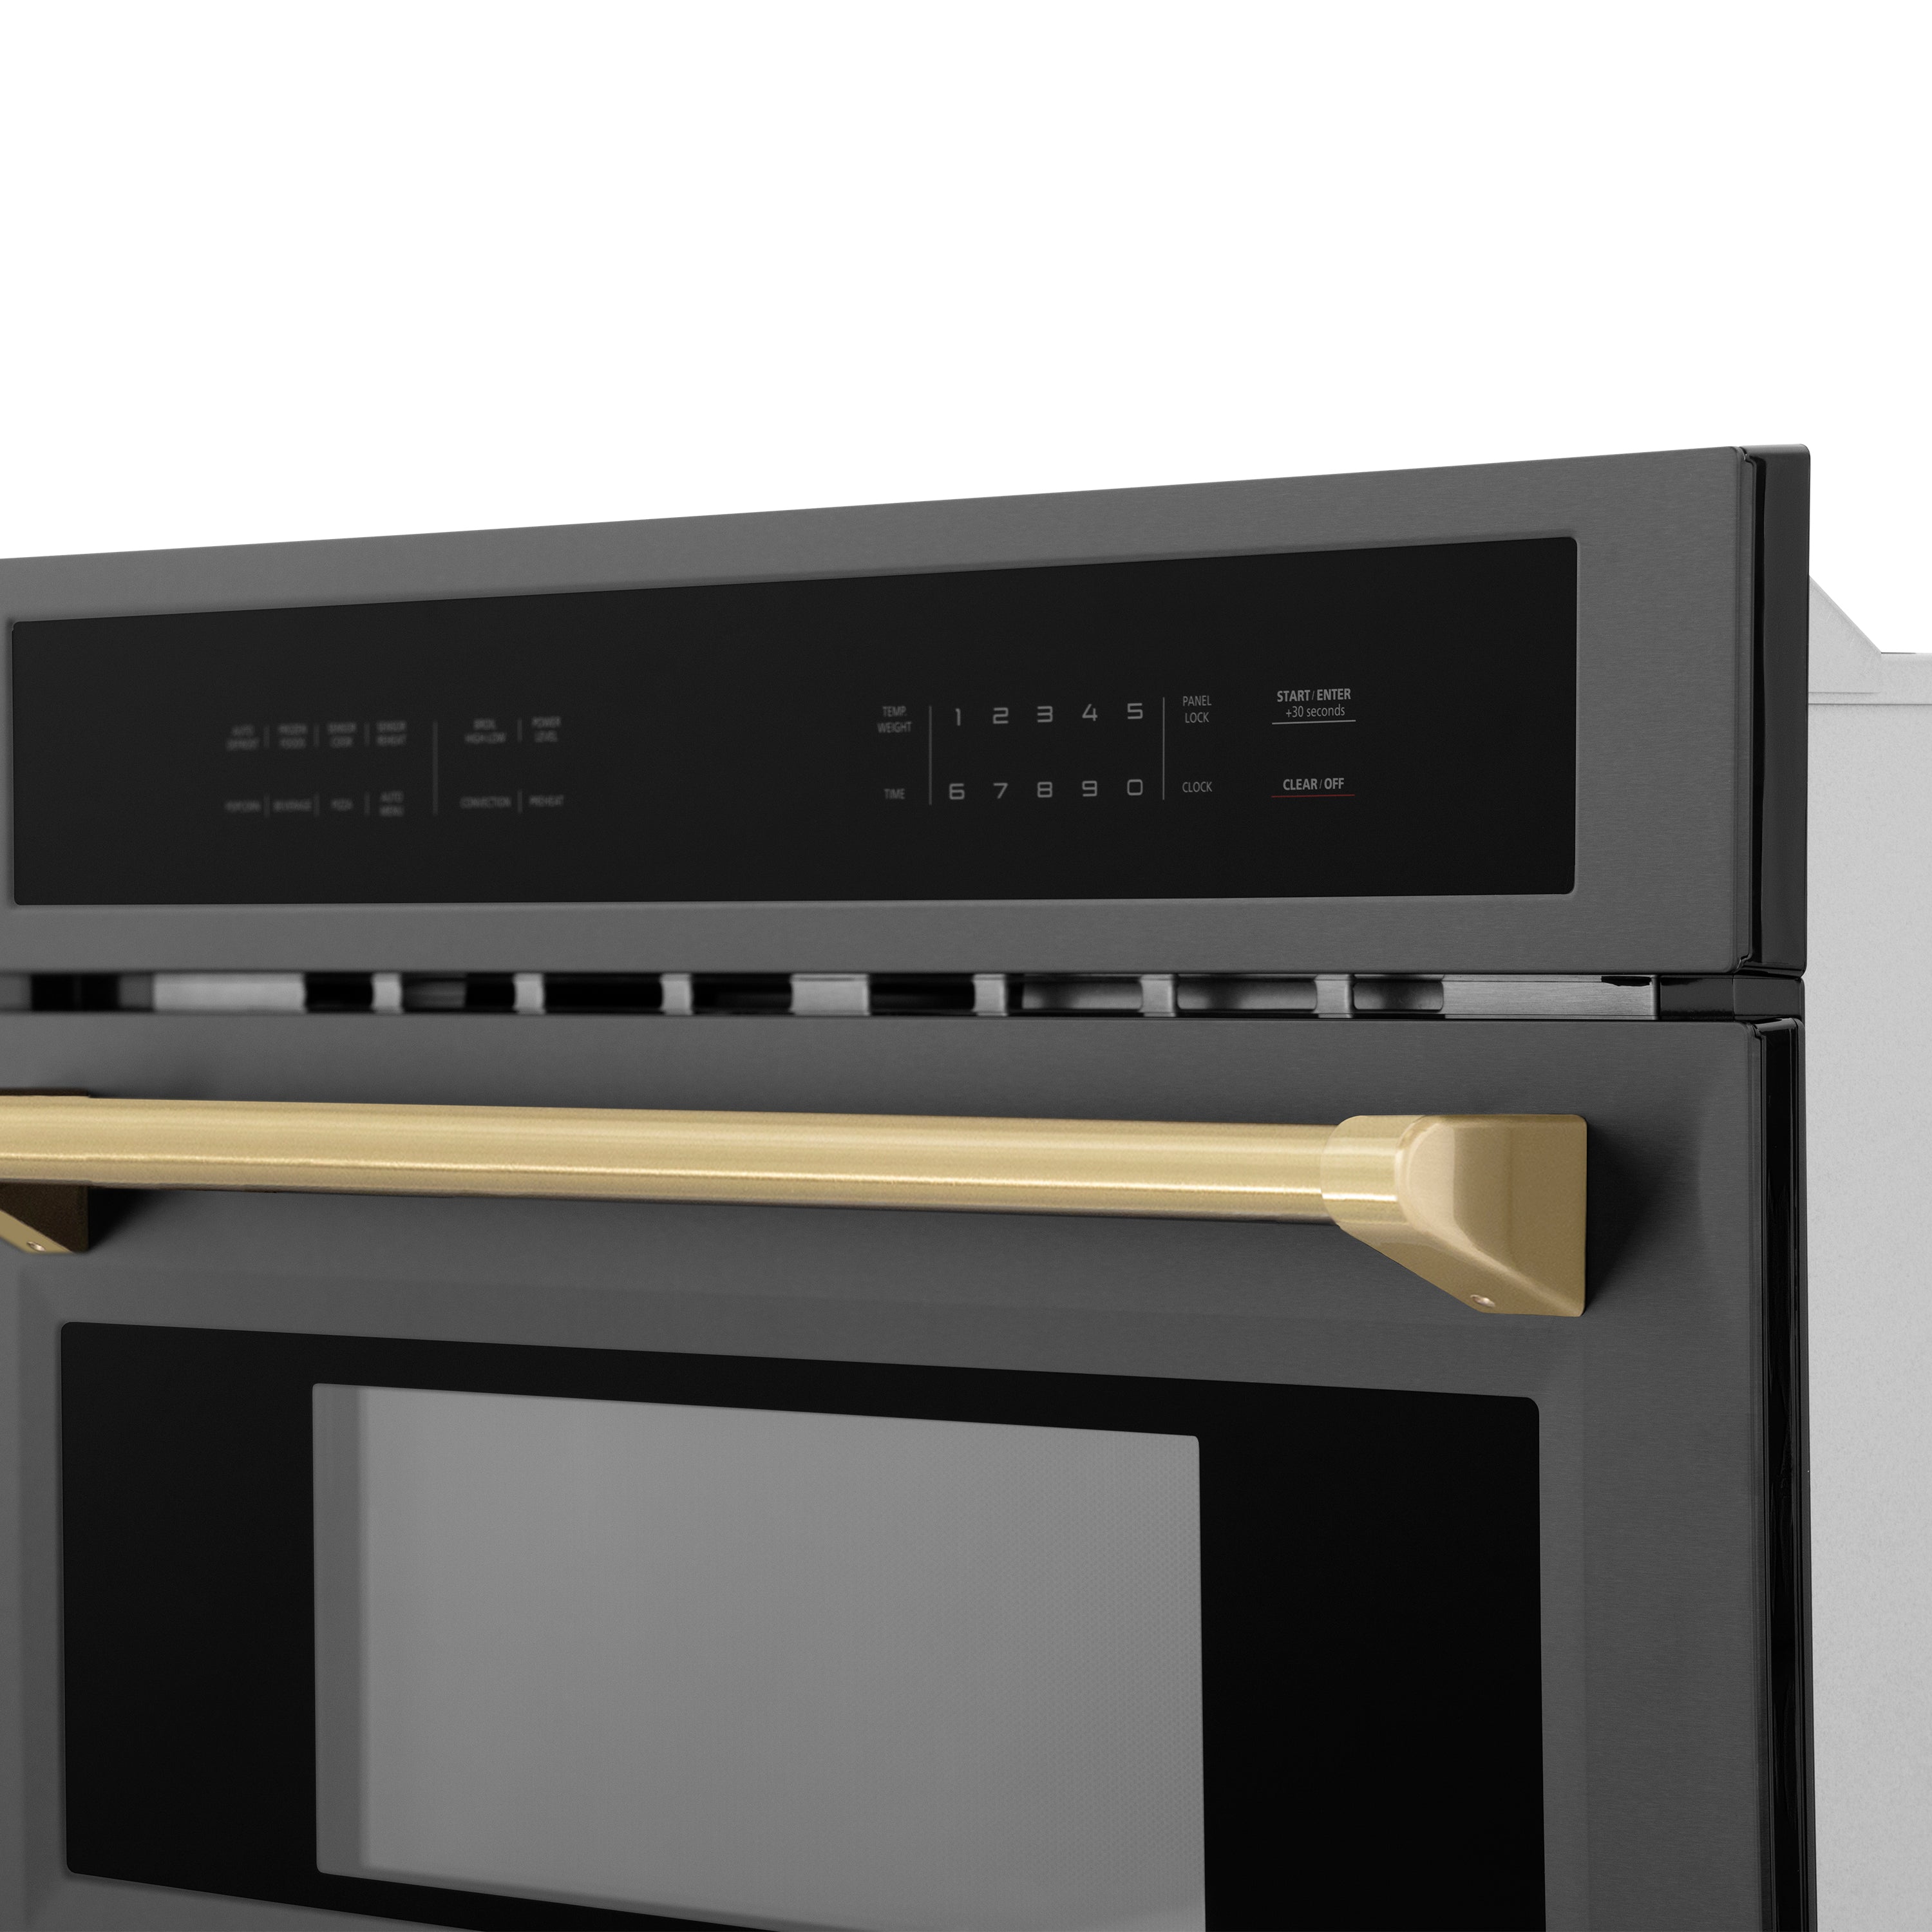 ZLINE Autograph Edition 30” 1.6 cu ft. Built-in Convection Microwave Oven in Black Stainless Steel and Champagne Bronze Accents